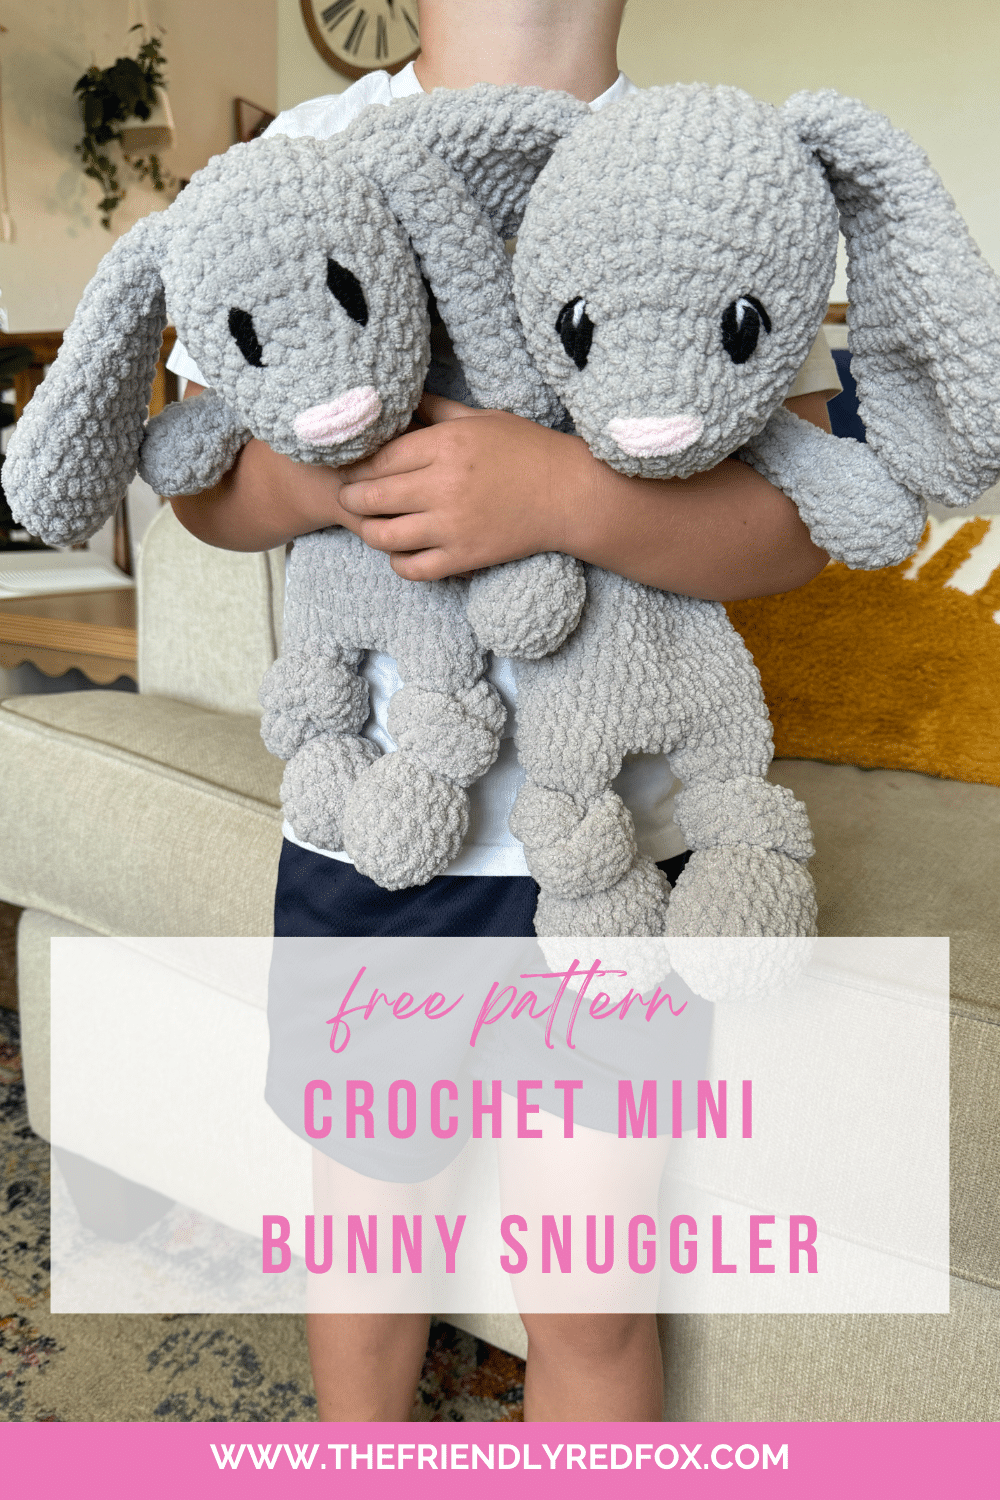 This is a free crochet snuggler pattern of the cuddly classic bunny! Half stuffed animal, half blanket but twice the fun! This crochet bunny lovey would be a great crocheted nursery gift! Embroidered eyes and blanket yarn make it more baby friendly.